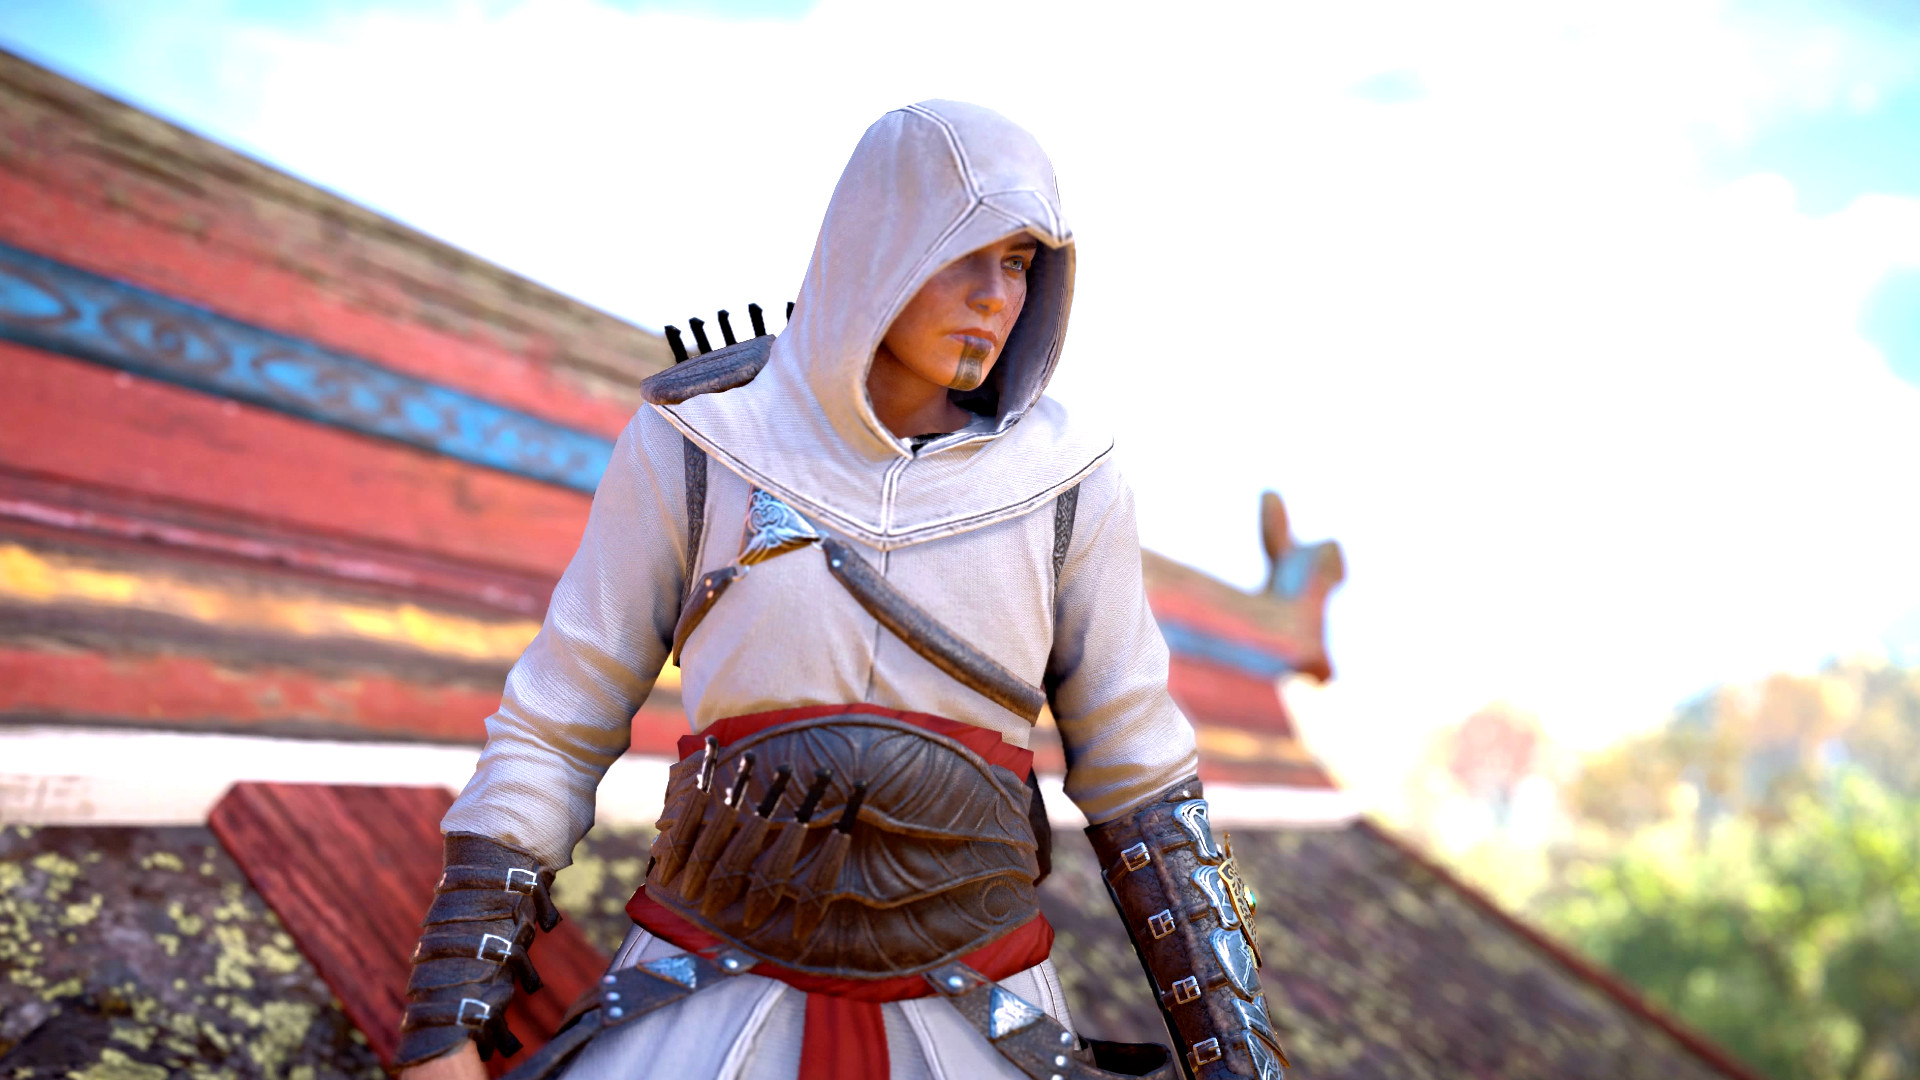 Assassin's Creed Valhalla Gives All Players 'Godly Reward' Pack